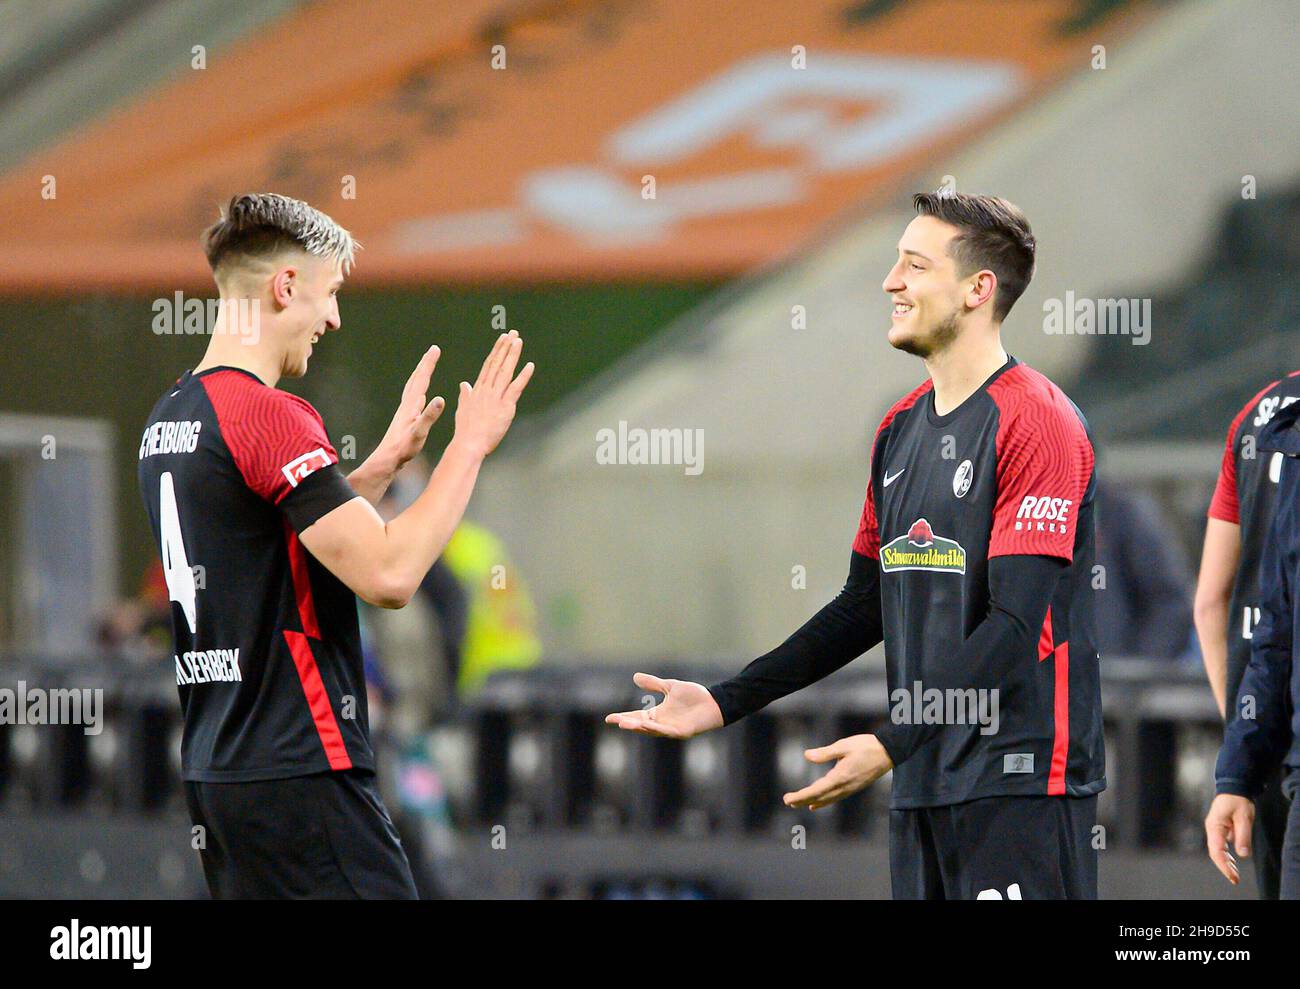 Keven SCHLOTTERBECK r. (FR) claps Nico SCHLOTTERBECK (FR), substitution, substitution, football 1st Bundesliga, 14th matchday, Borussia Monchengladbach (MG) - SC Freiburg (FR) 0: 6, on December 5th, 2021 in Borussia Monchengladbach/Germany. #DFL regulations prohibit any use of photographs as image sequences and/or quasi-video # Â Stock Photo